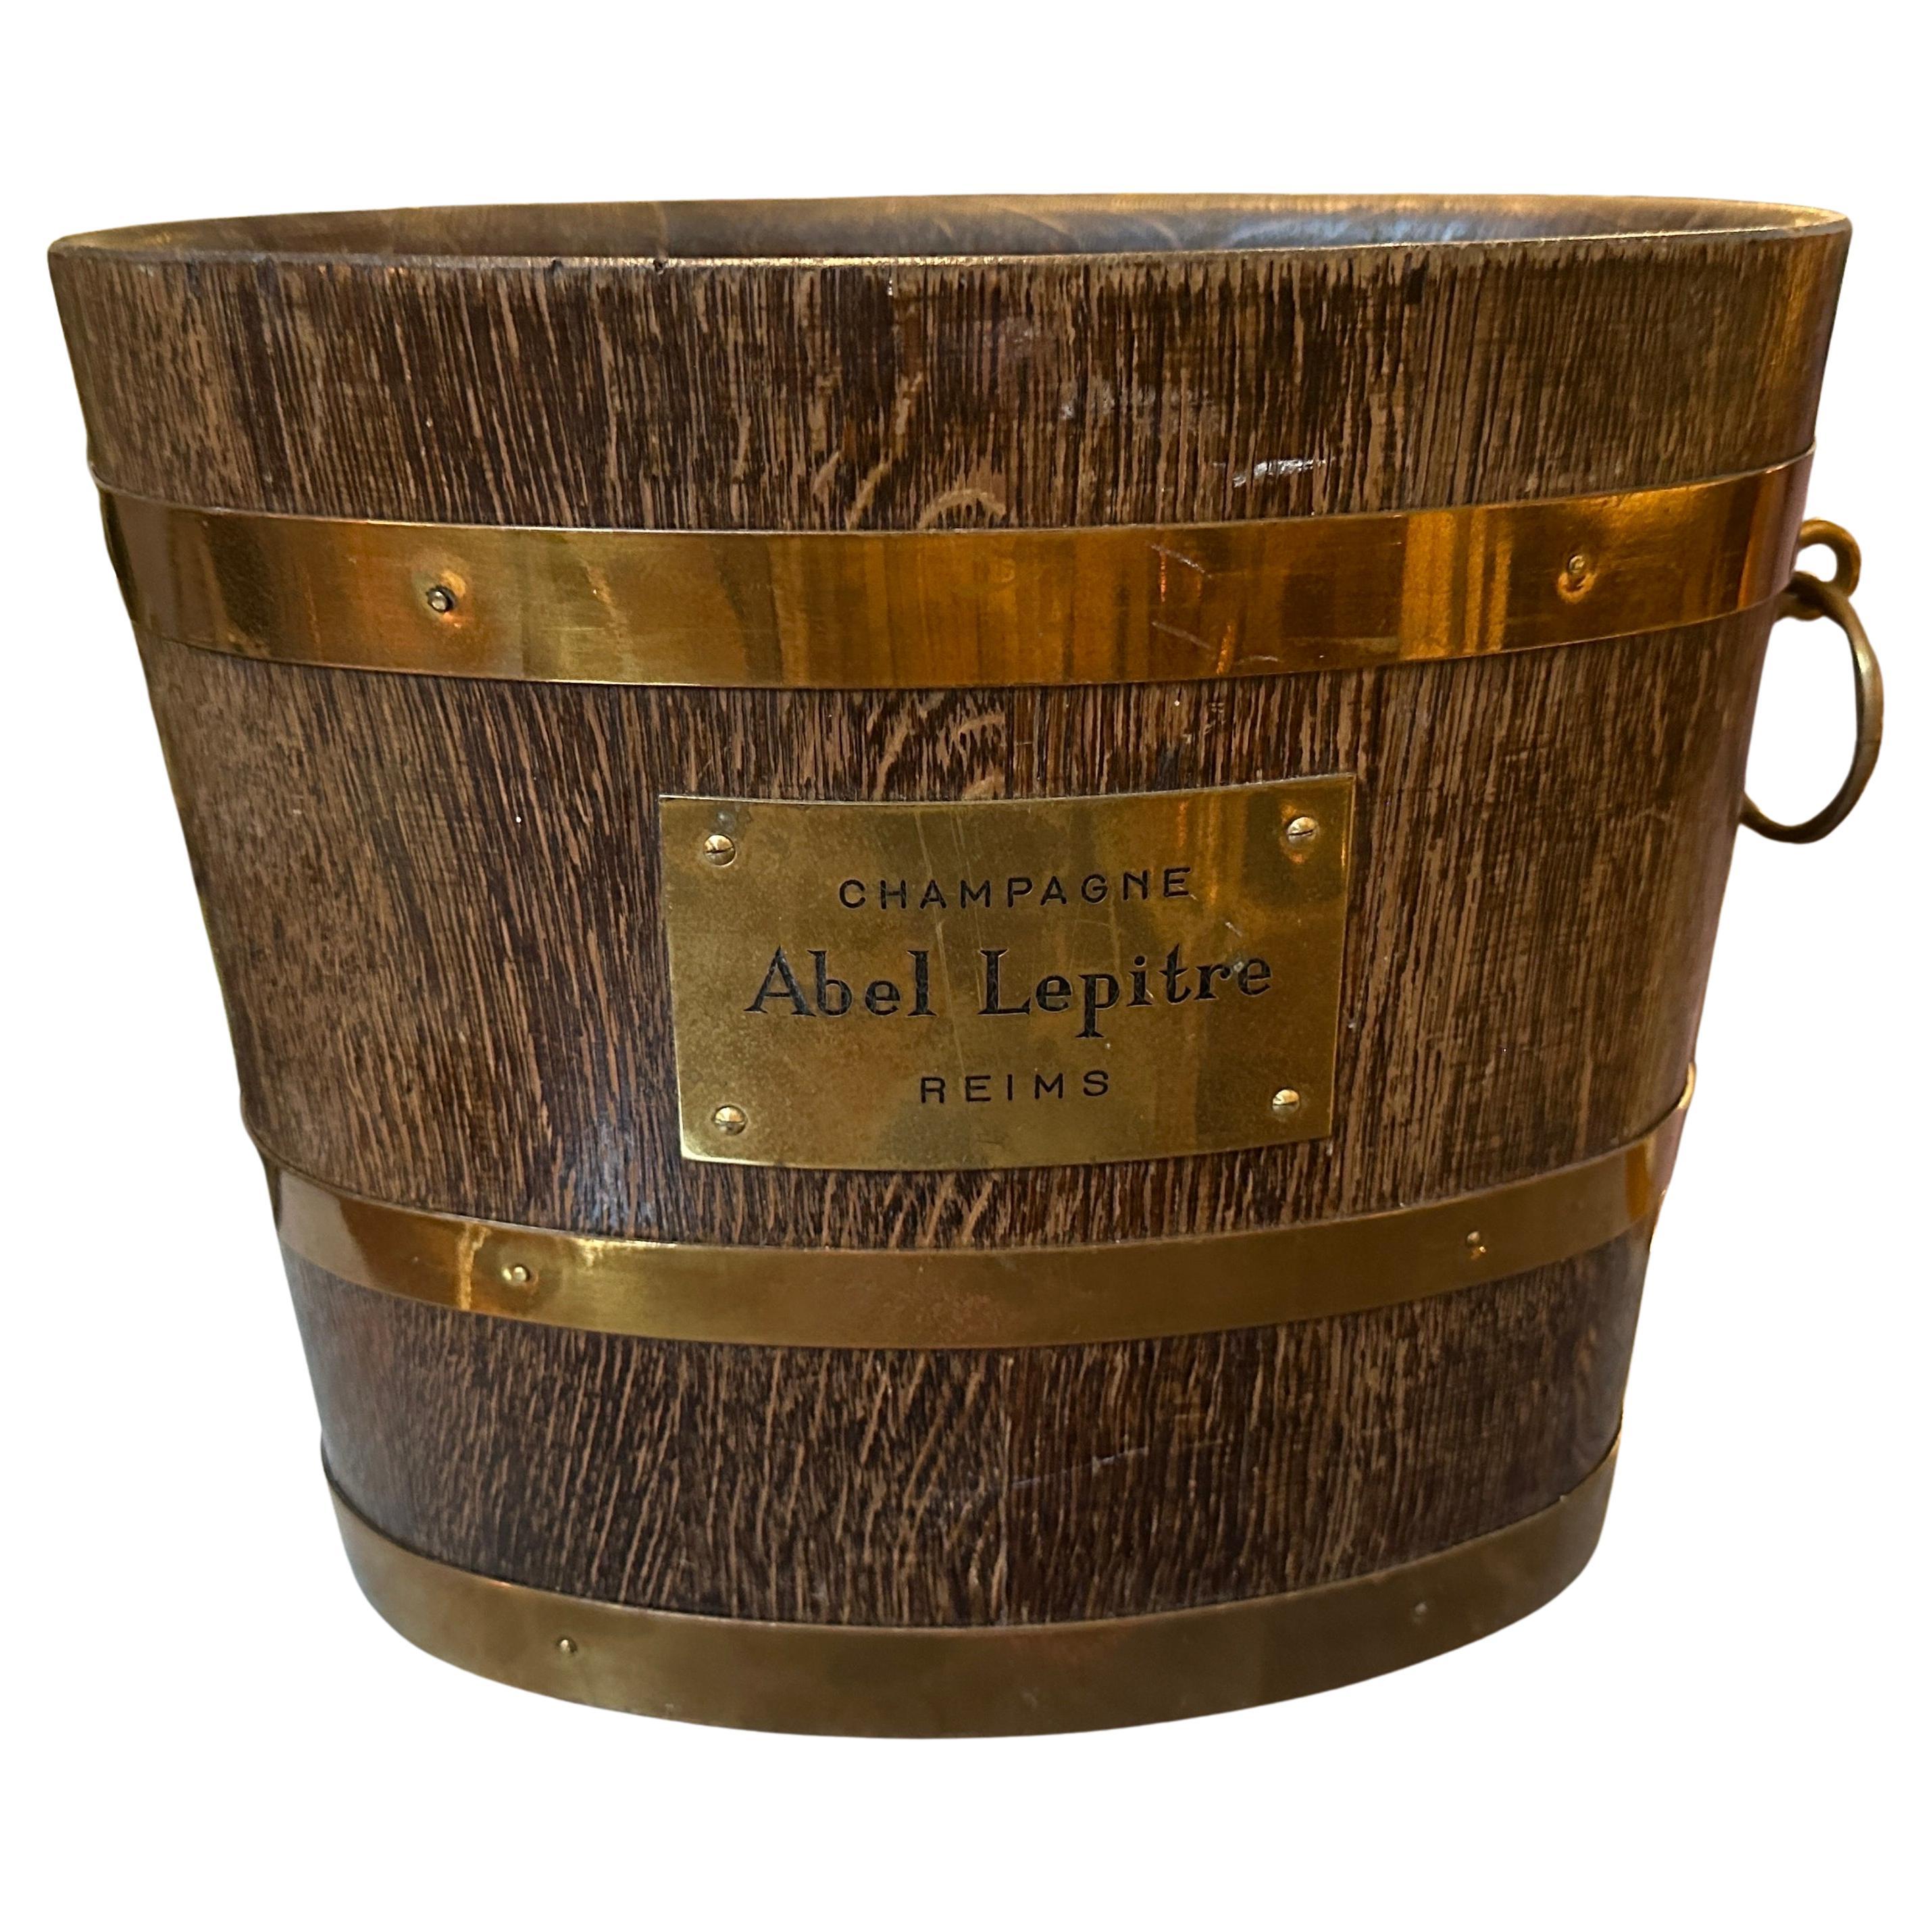 1950s Art Deco Oak and Brass French Wine Cooler by G. Lafitte for Abel Lepitre